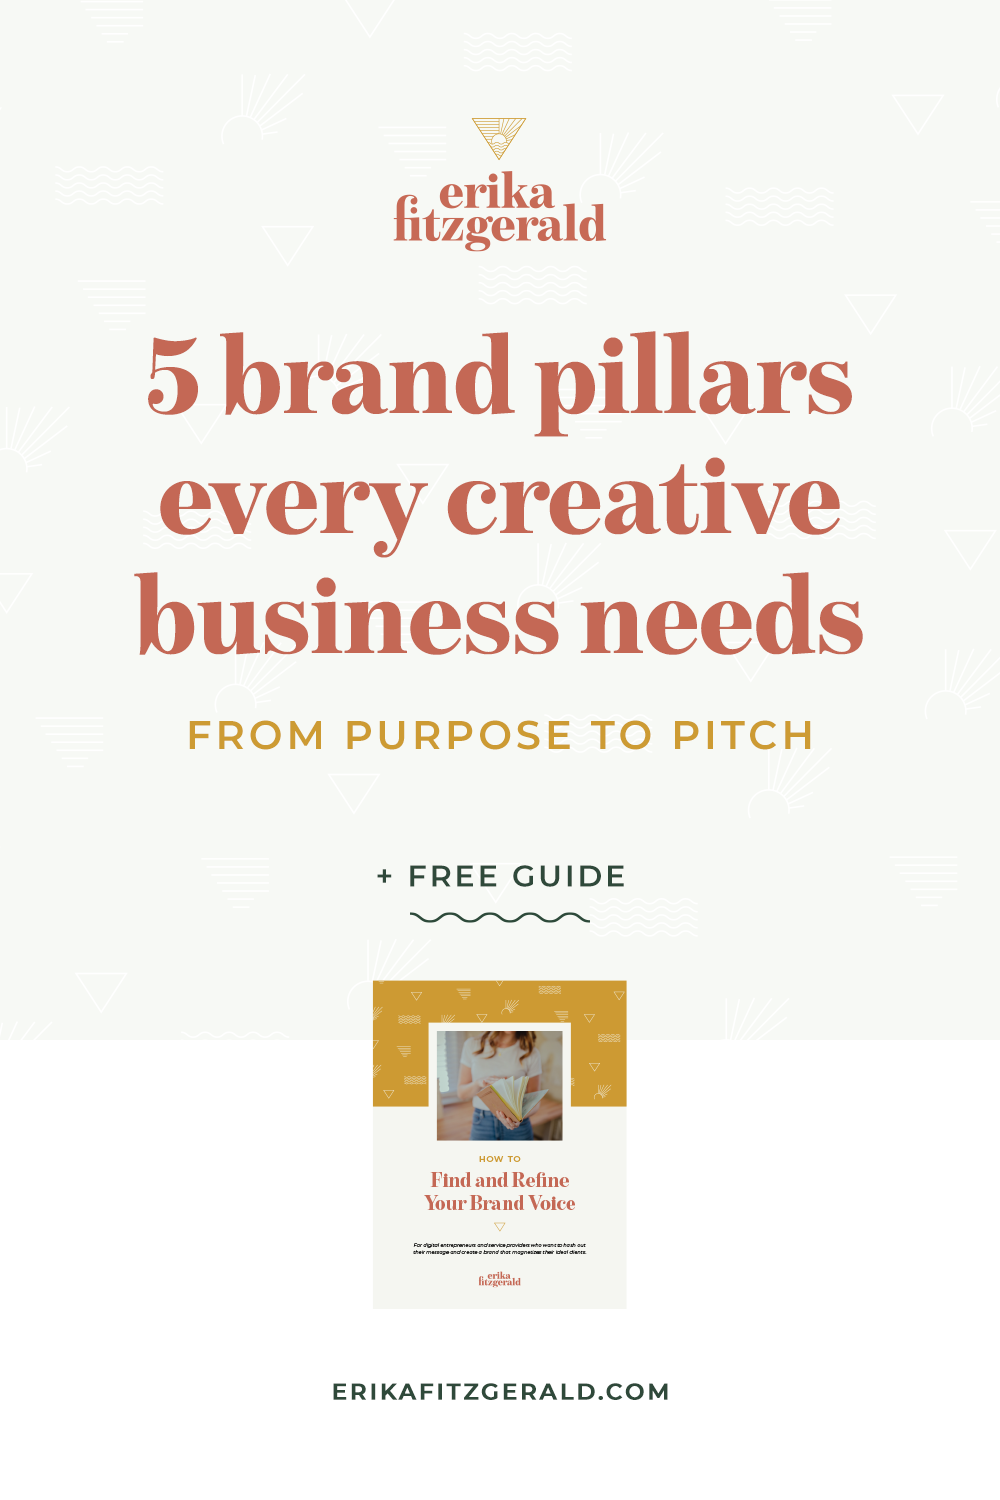 5 brand pillars to define for your creative business